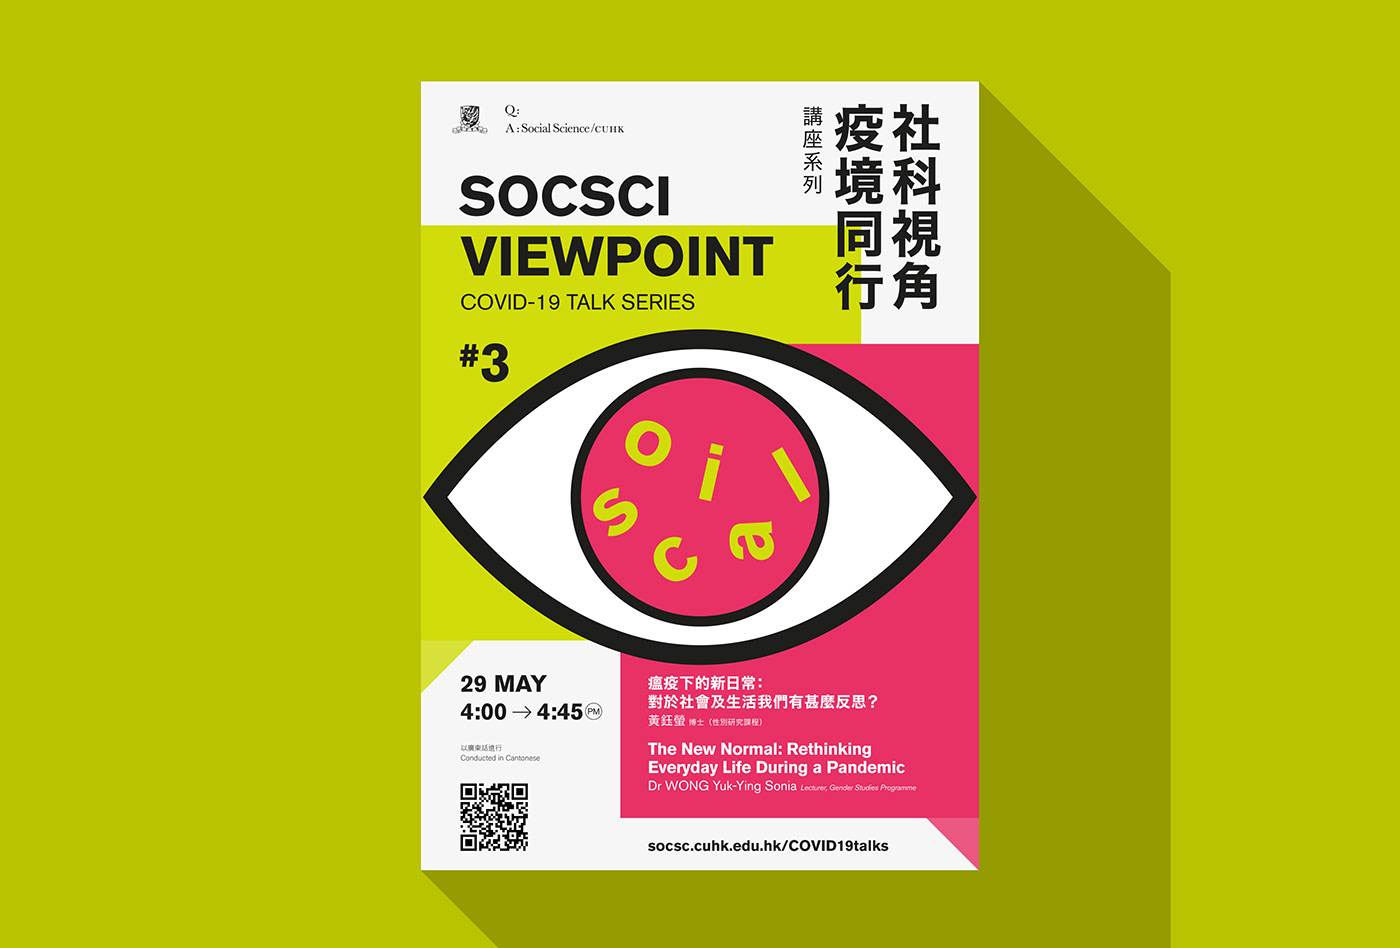 COVID-19 minimal Poster Design Poster series social science University viewpoint colorful poster